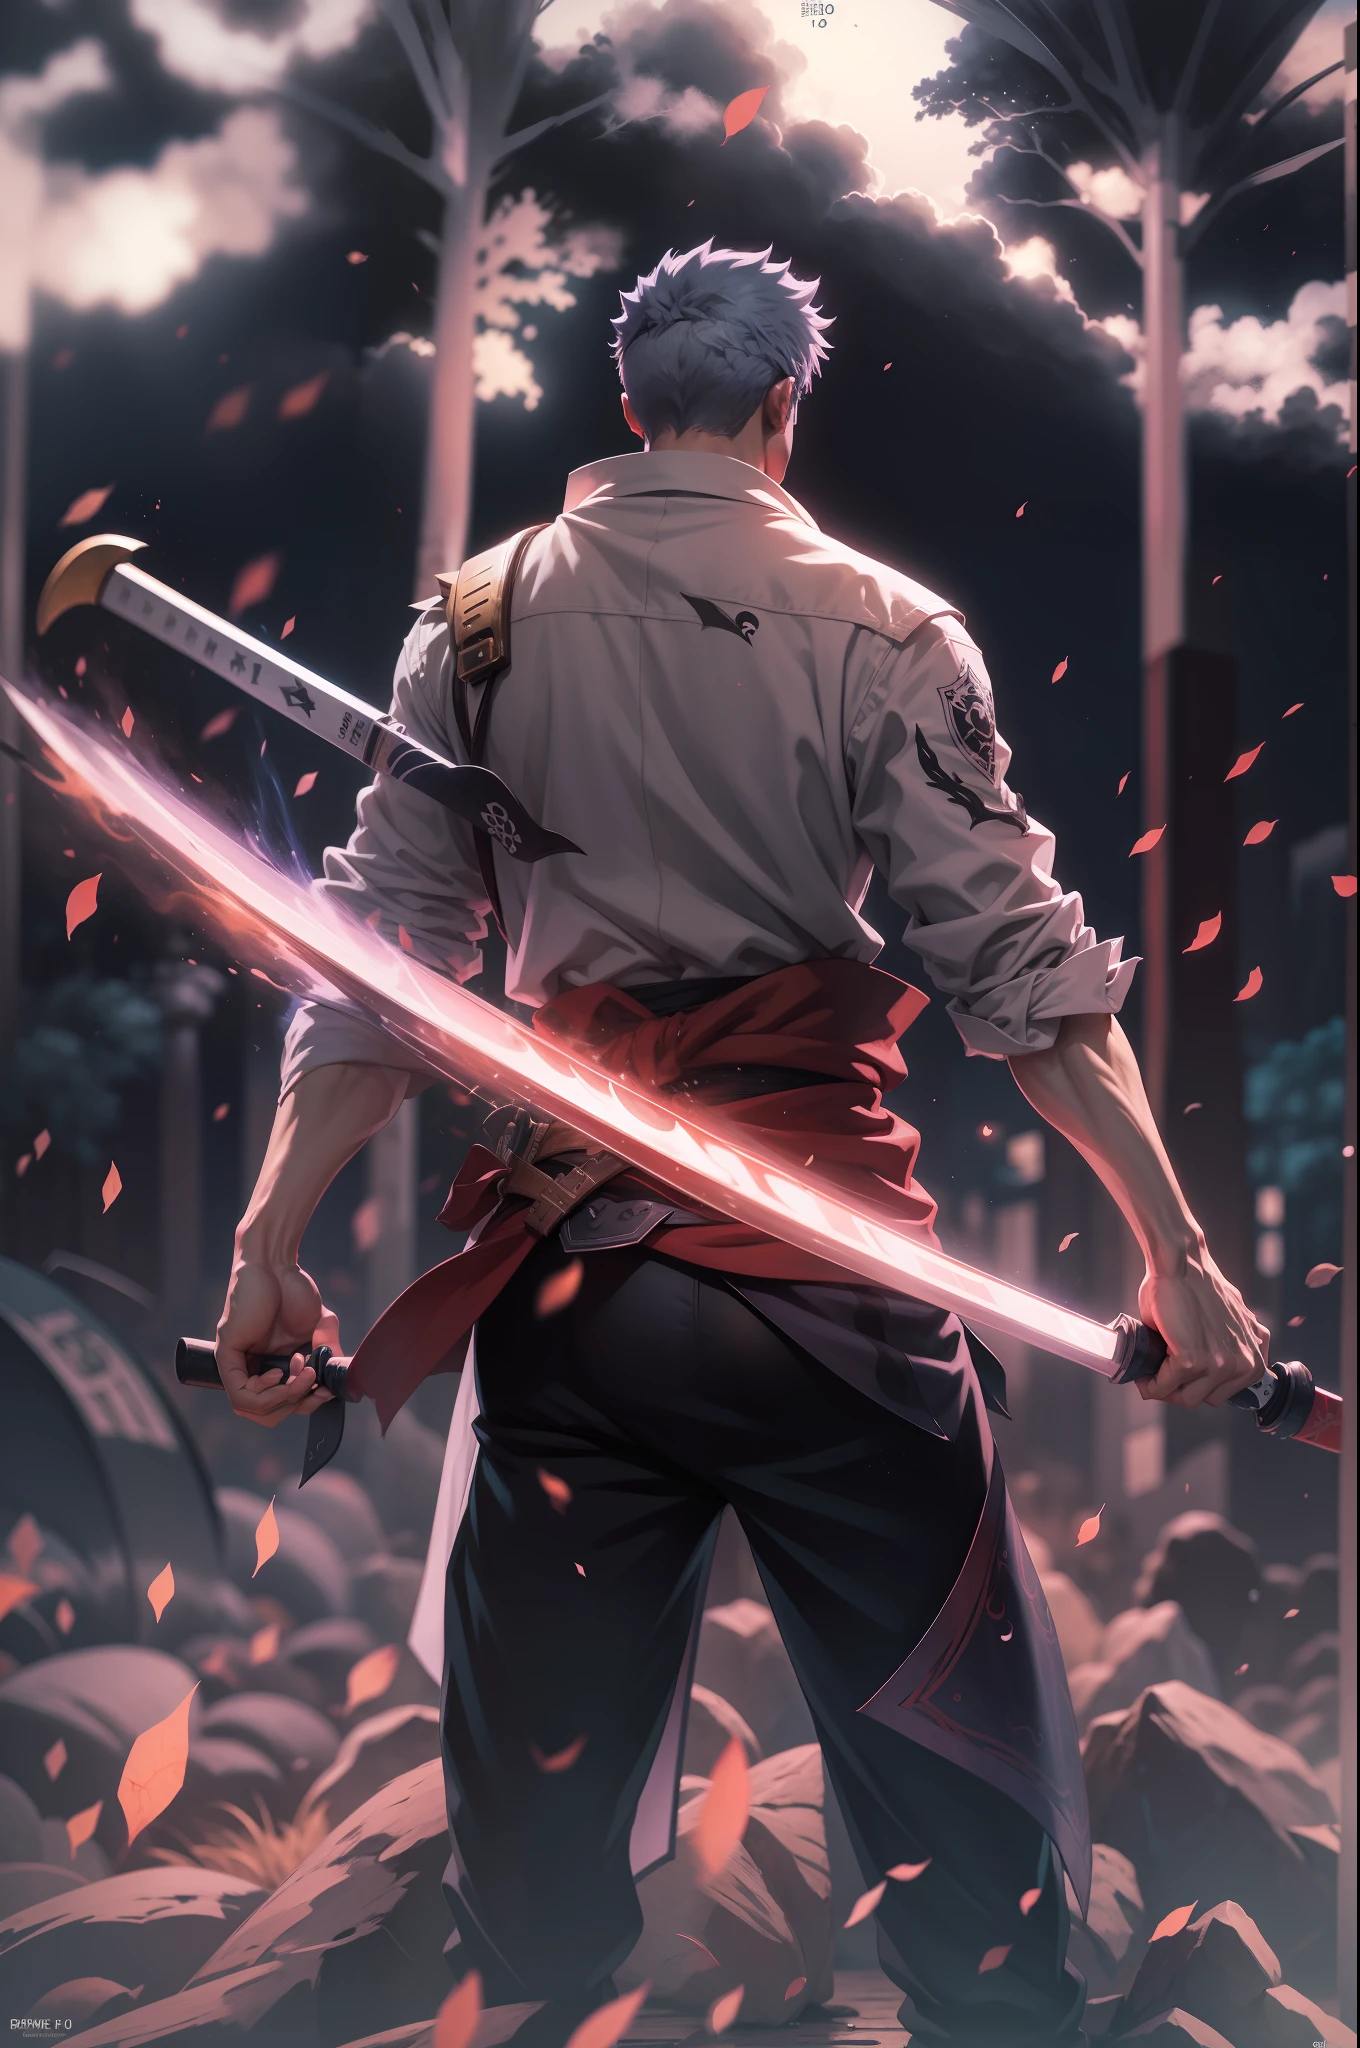 A closeup of a person holding two swords in front of a demon, Badass Anime 8K, Roronoa Zoro, Handsome boy in Demon Slayer art, anime wallpaper 4K, anime wallpapers 4k, manga wallpaper 4k, Anime Art Wallpaper 4K, Anime Art Wallpaper 4K, anime wallpaper 4k, anime epic artwork, 4K anime style